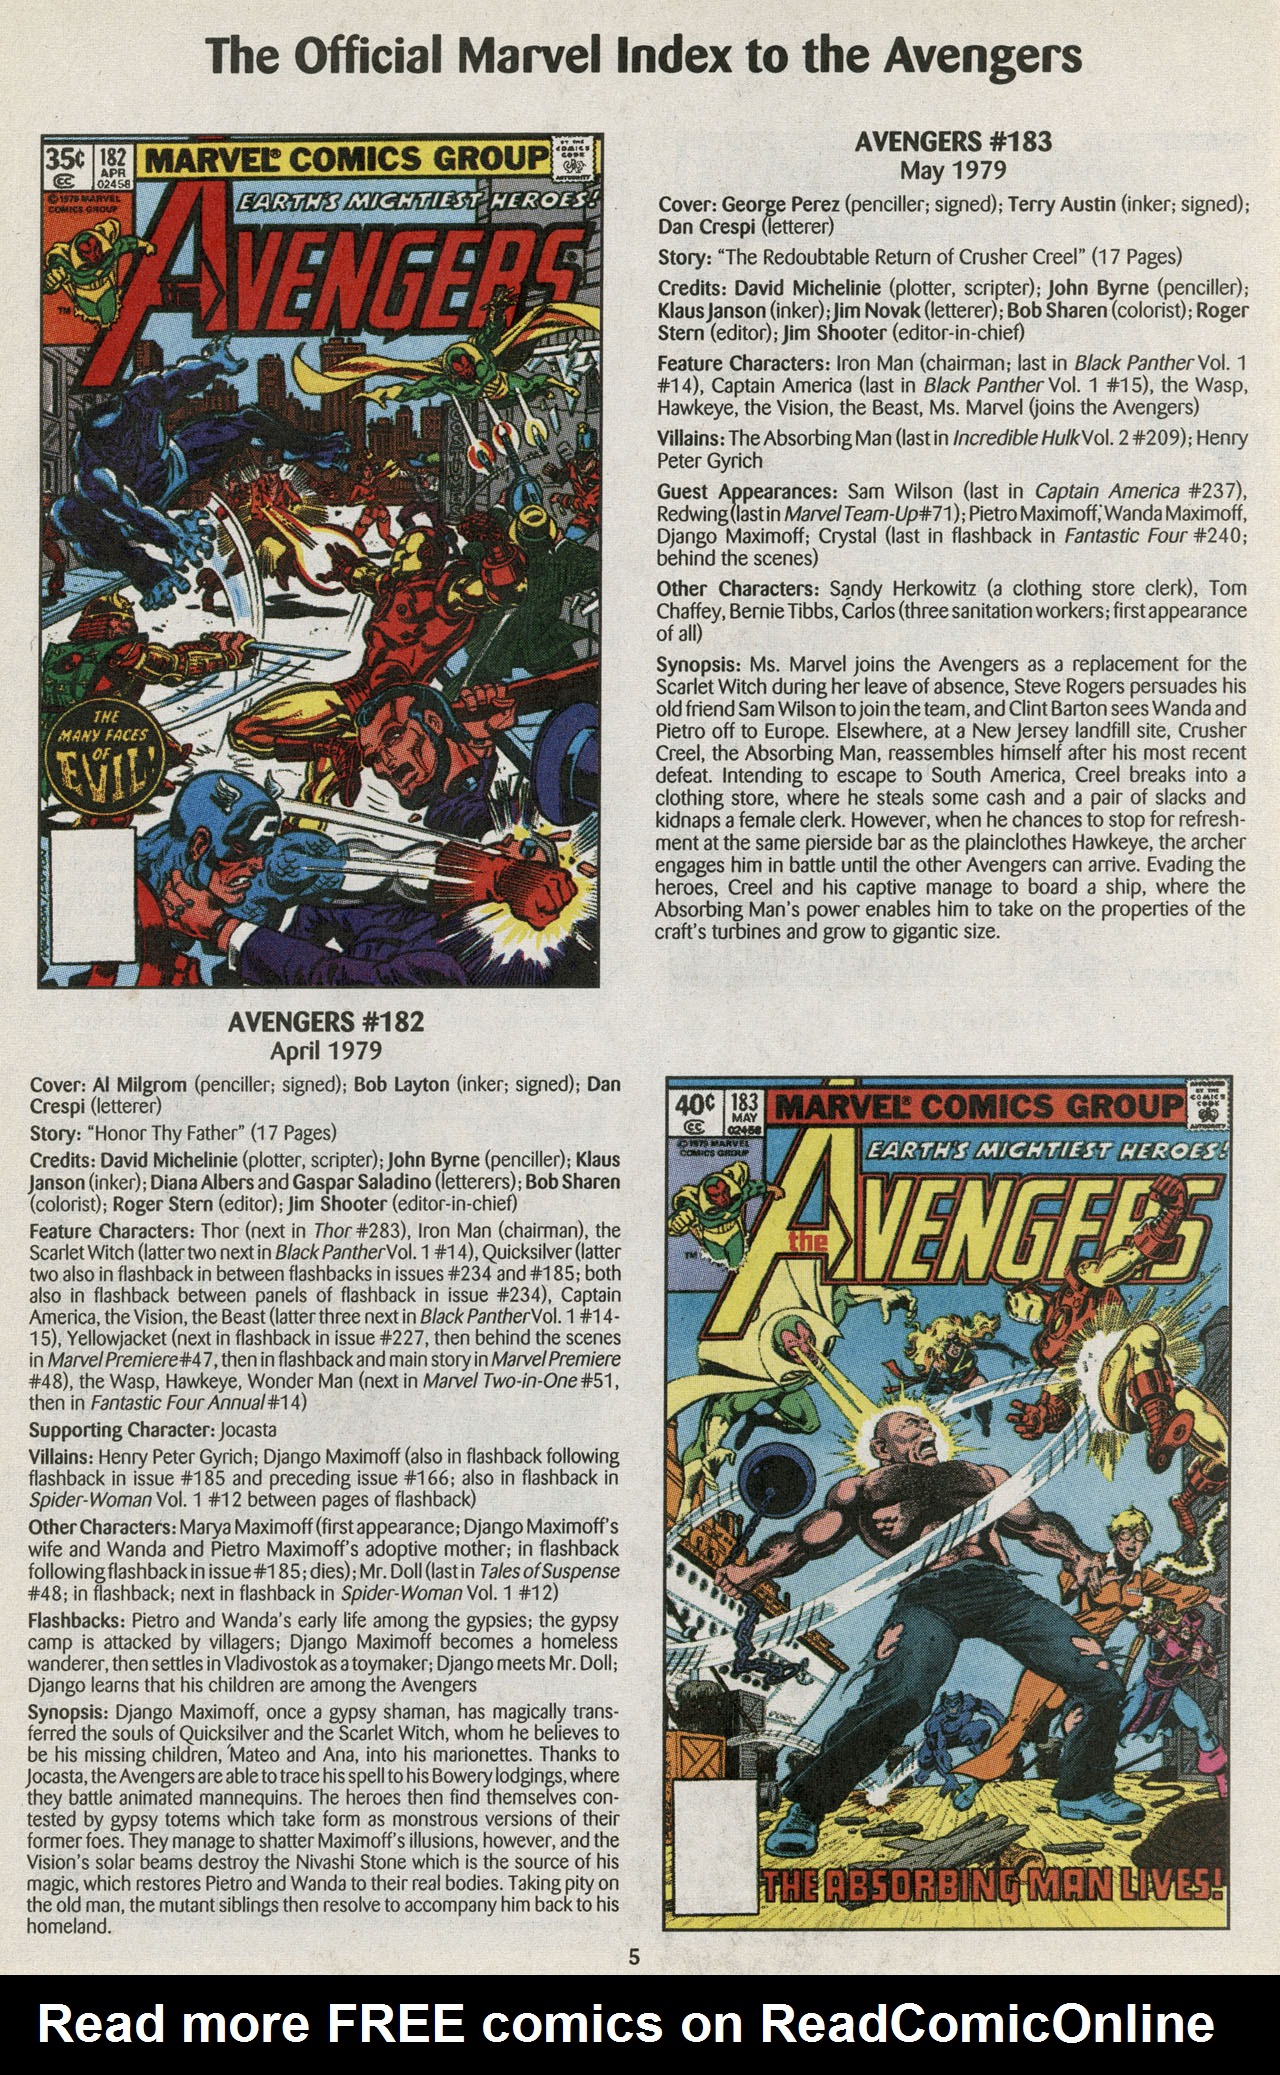 Read online The Official Marvel Index to the Avengers comic -  Issue #4 - 7